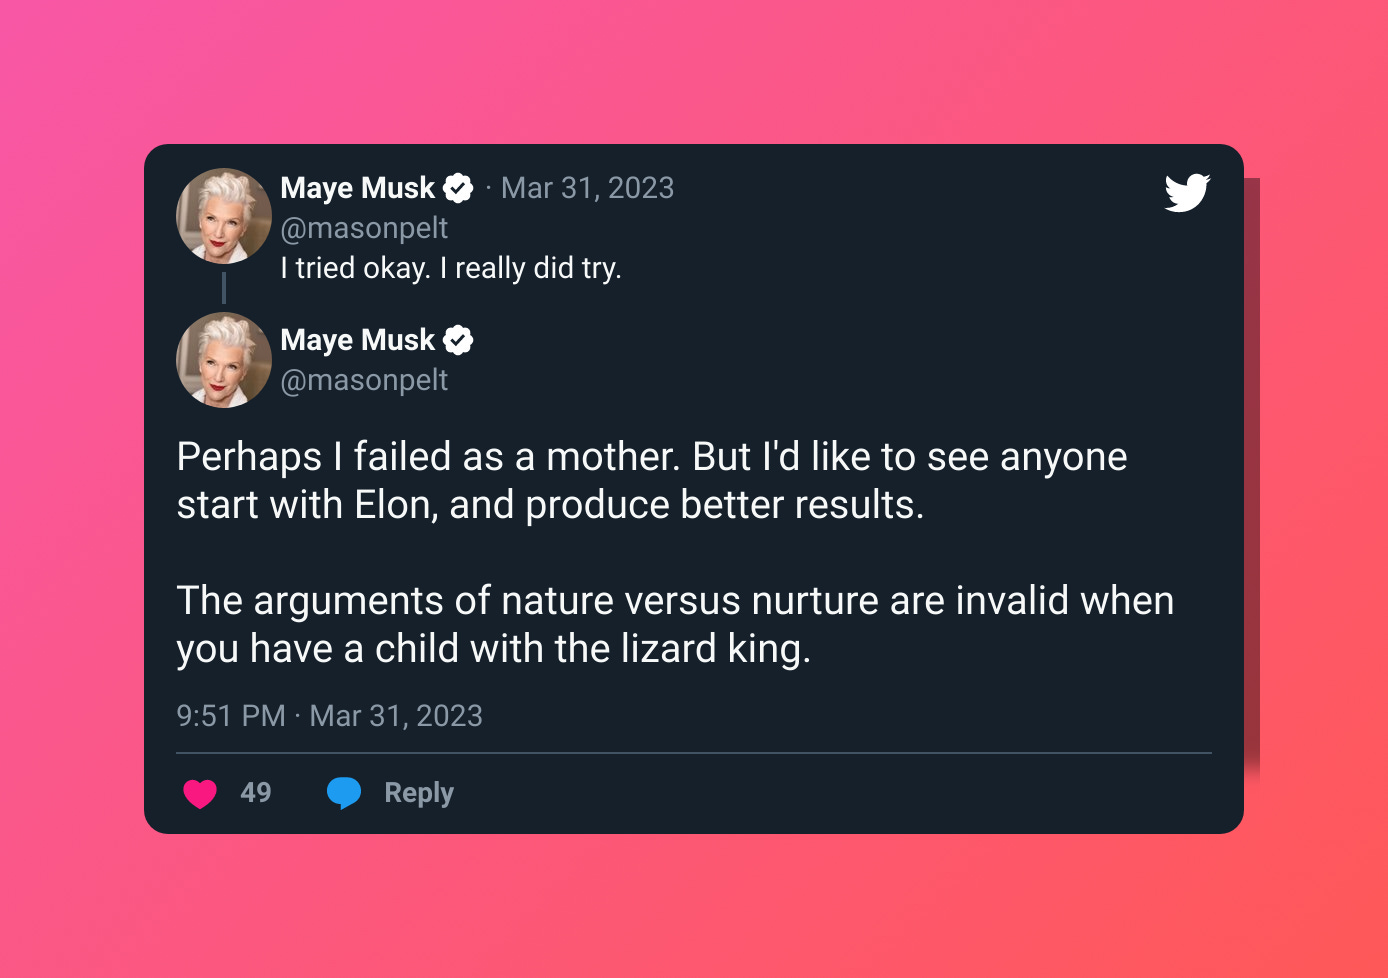 screenshots of blue check impersonations of Maye Musk tweeting "I tried okay. I really did try." "Perhaps I failed as a mother. But I'd like to see anyone start with Elon, and produce better results. The arguments of nature versus nurture are invalid when you have a child with the lizard king."